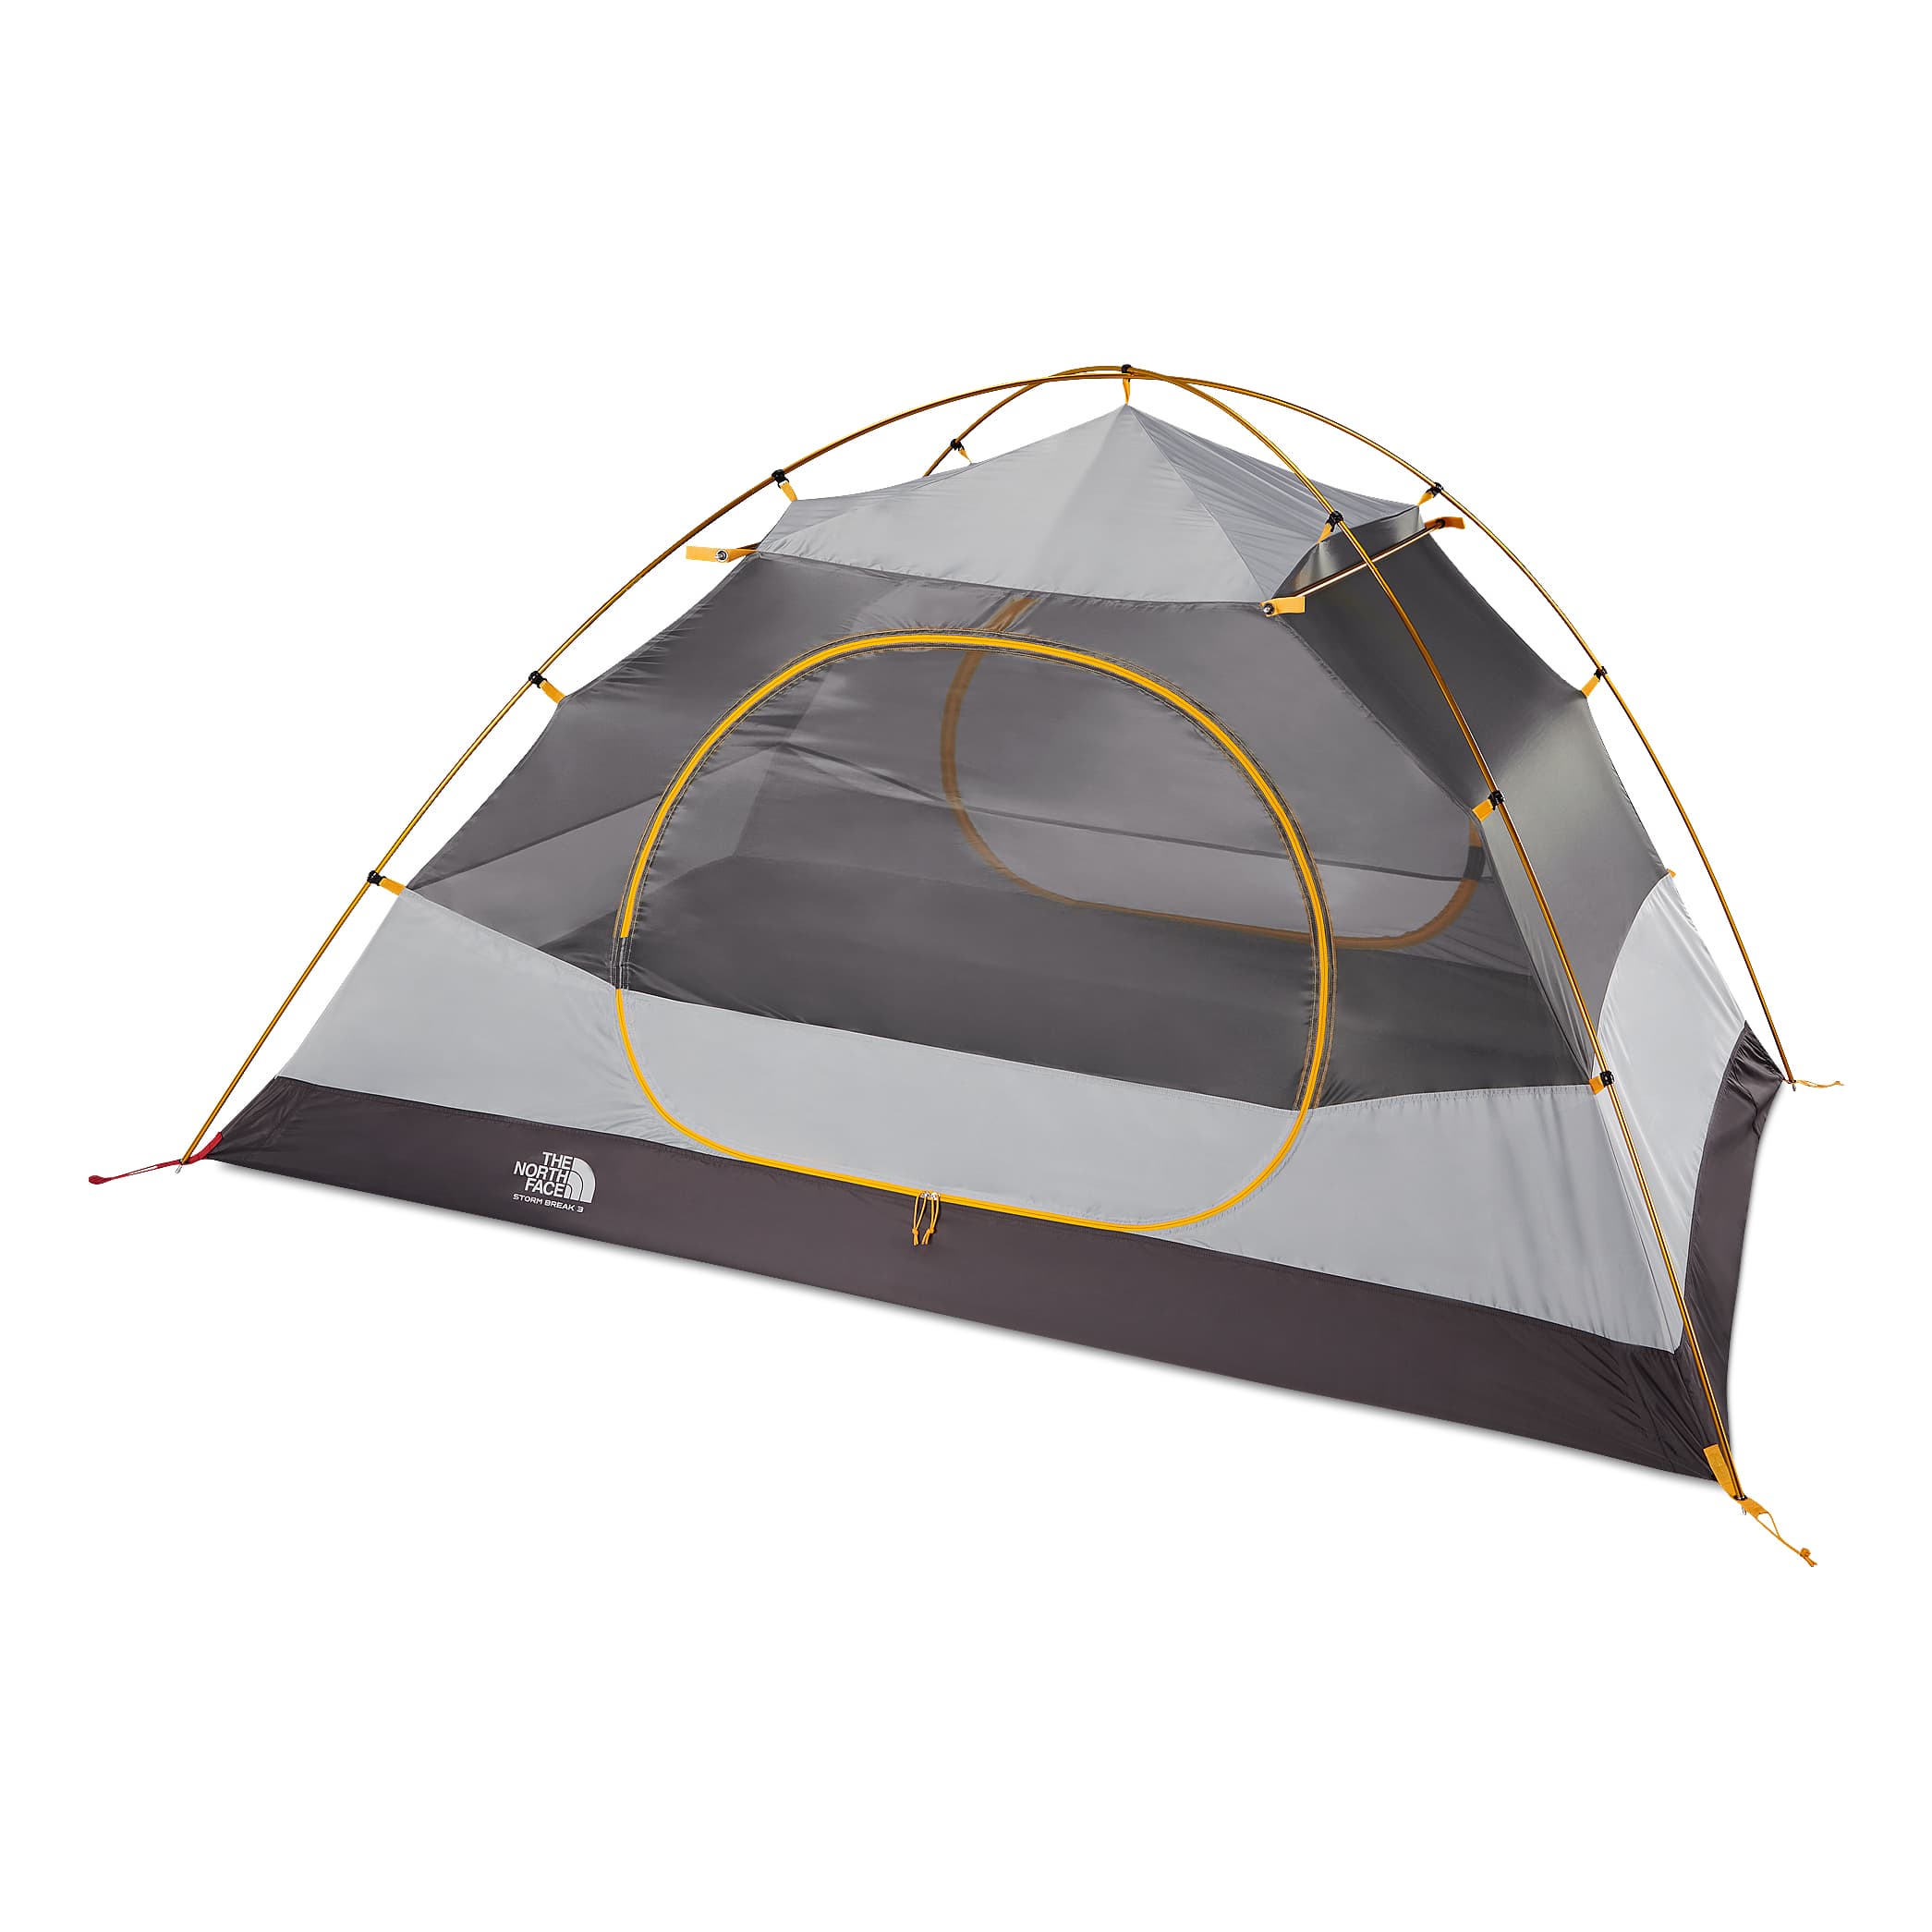 The North Face® Stormbreak Tents - Stormbreak 3 - Without Fly